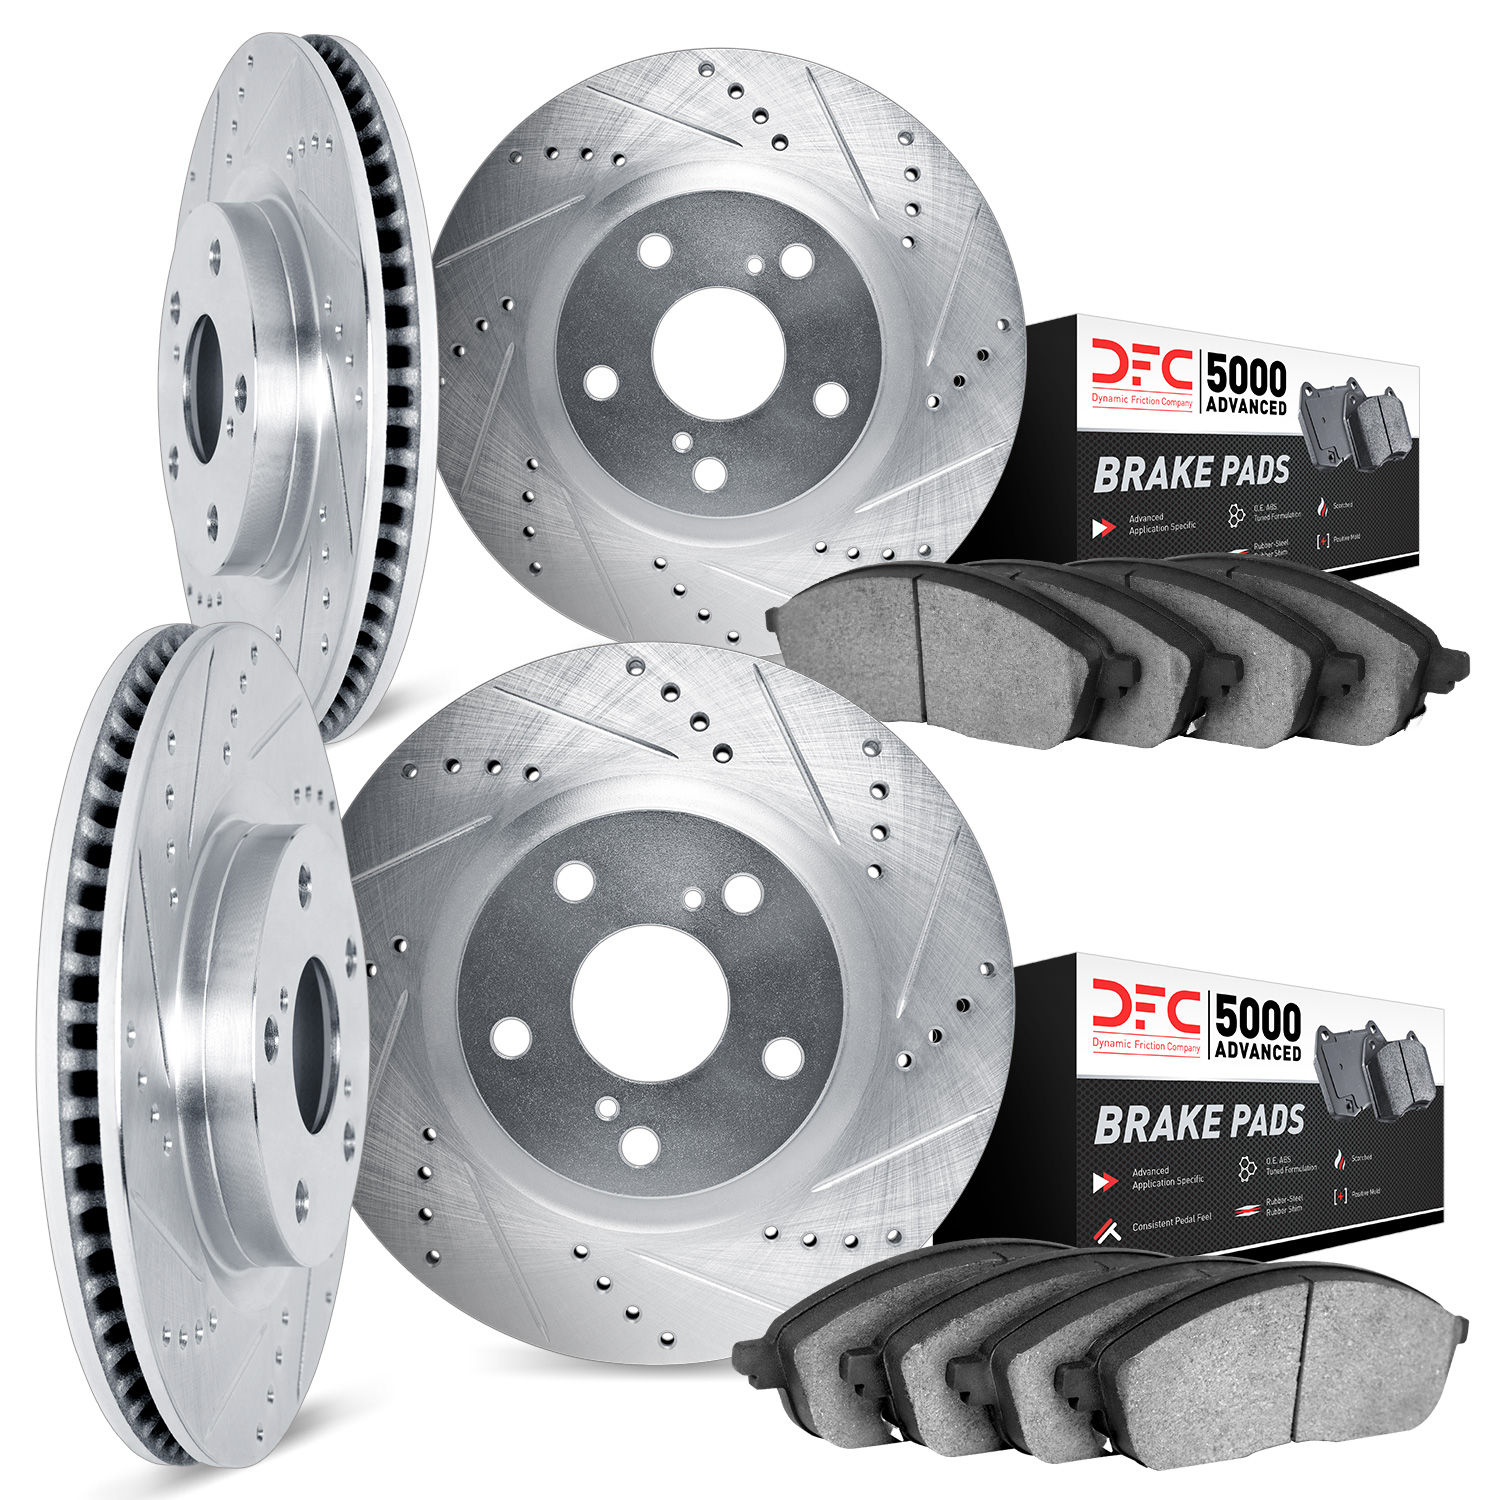 7504-20014 Drilled/Slotted Brake Rotors w/5000 Advanced Brake Pads Kit [Silver], Fits Select Jaguar, Position: Front and Rear